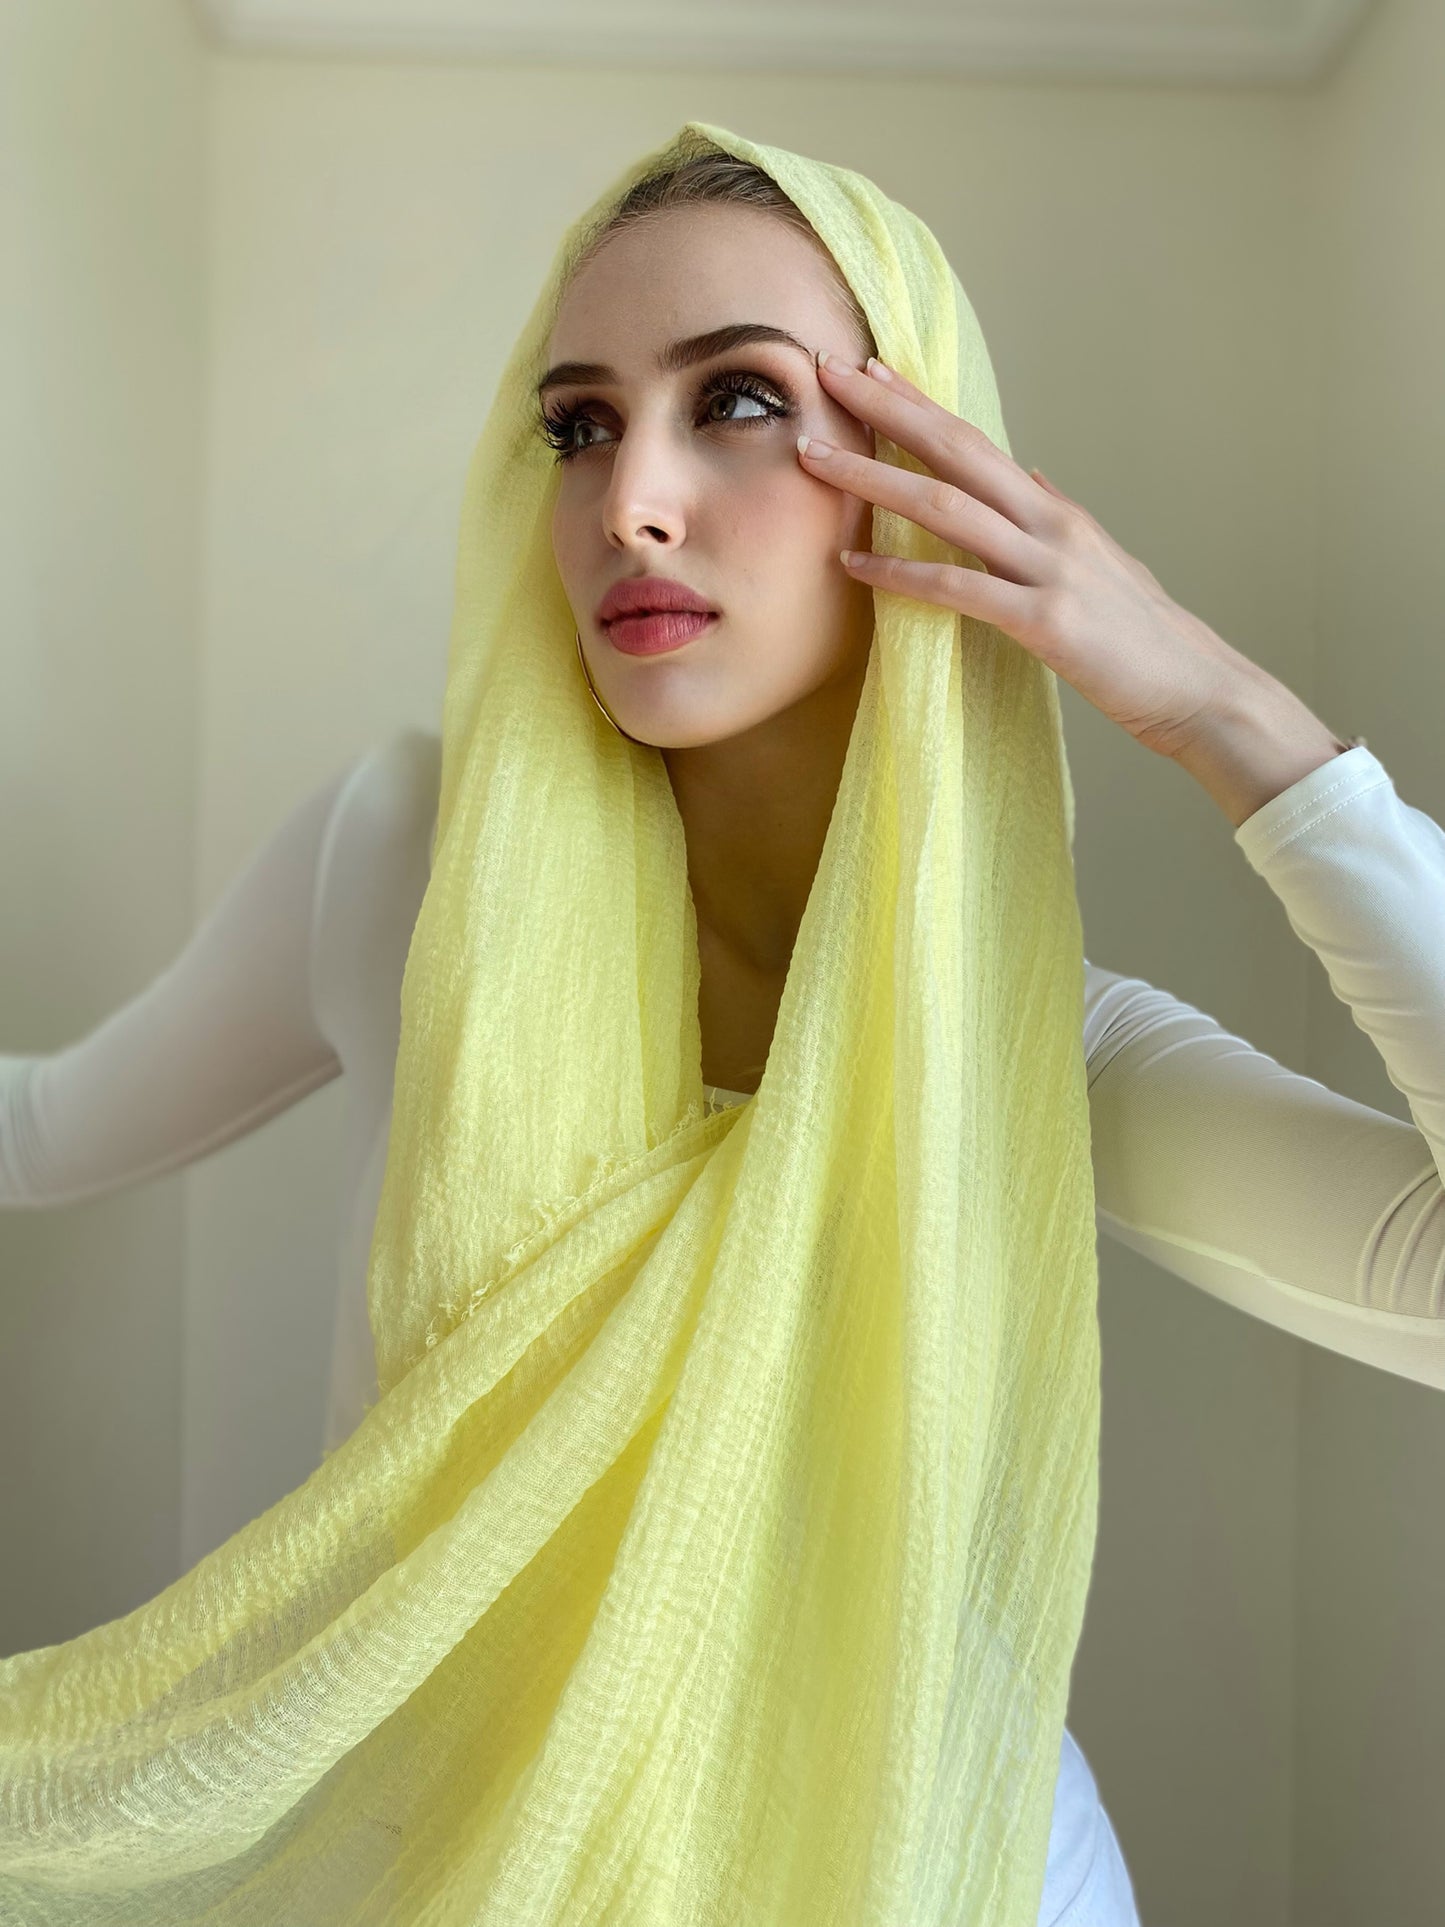 Load image into Gallery viewer, Lemonade - Crinkle Organic Cotton Scarf - Online Shopping - The Untitled Project
